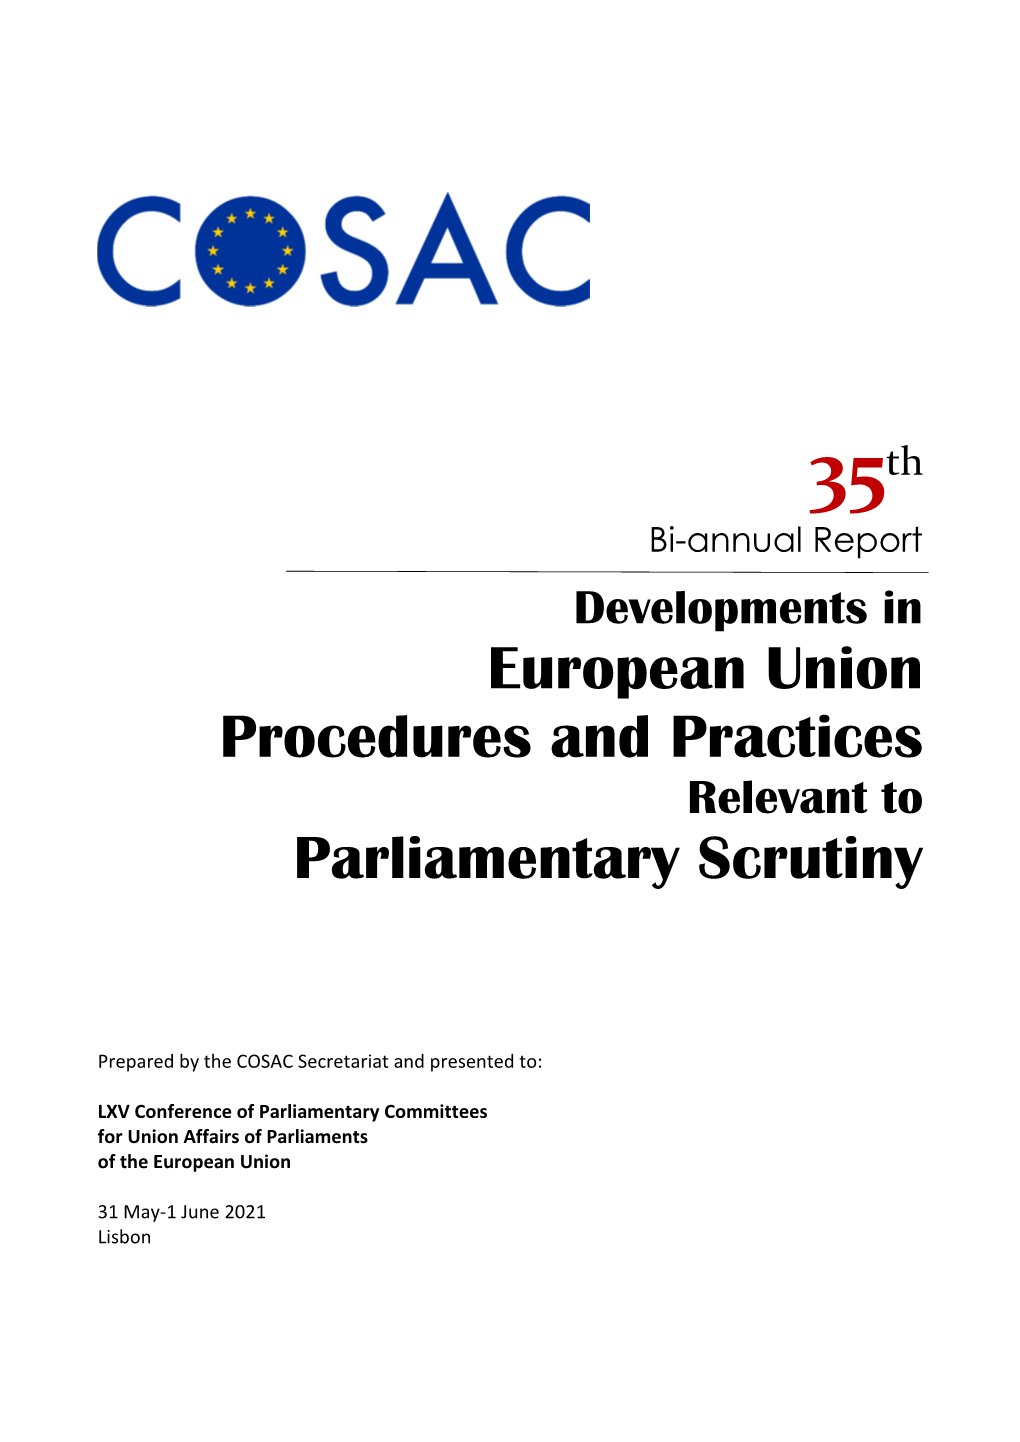 35Th Bi-Annual Report Developments in European Union Procedures and Practices Relevant to Parliamentary Scrutiny